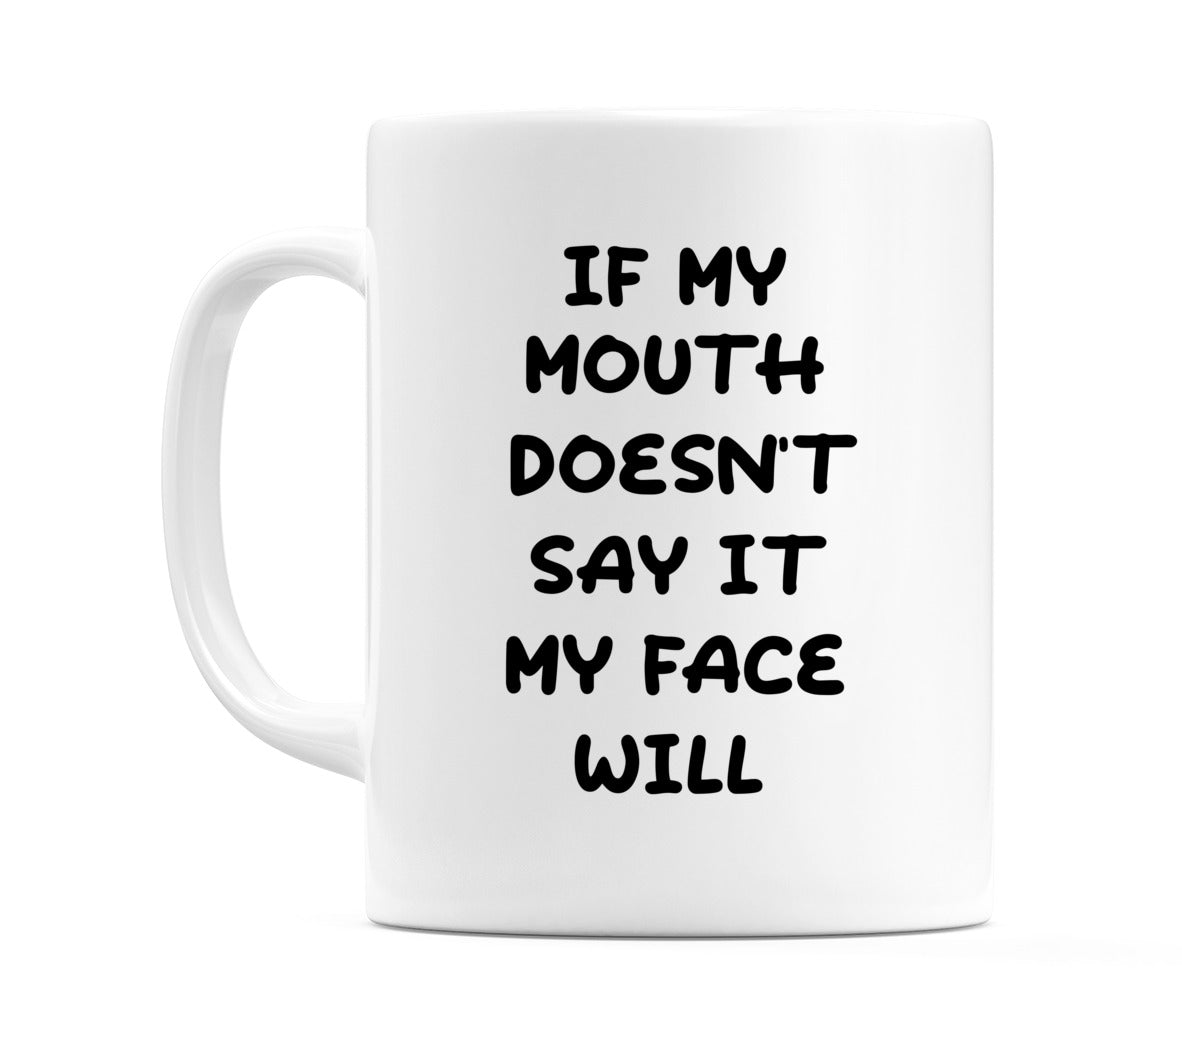 If my mouth doesn't say it my face will Mug